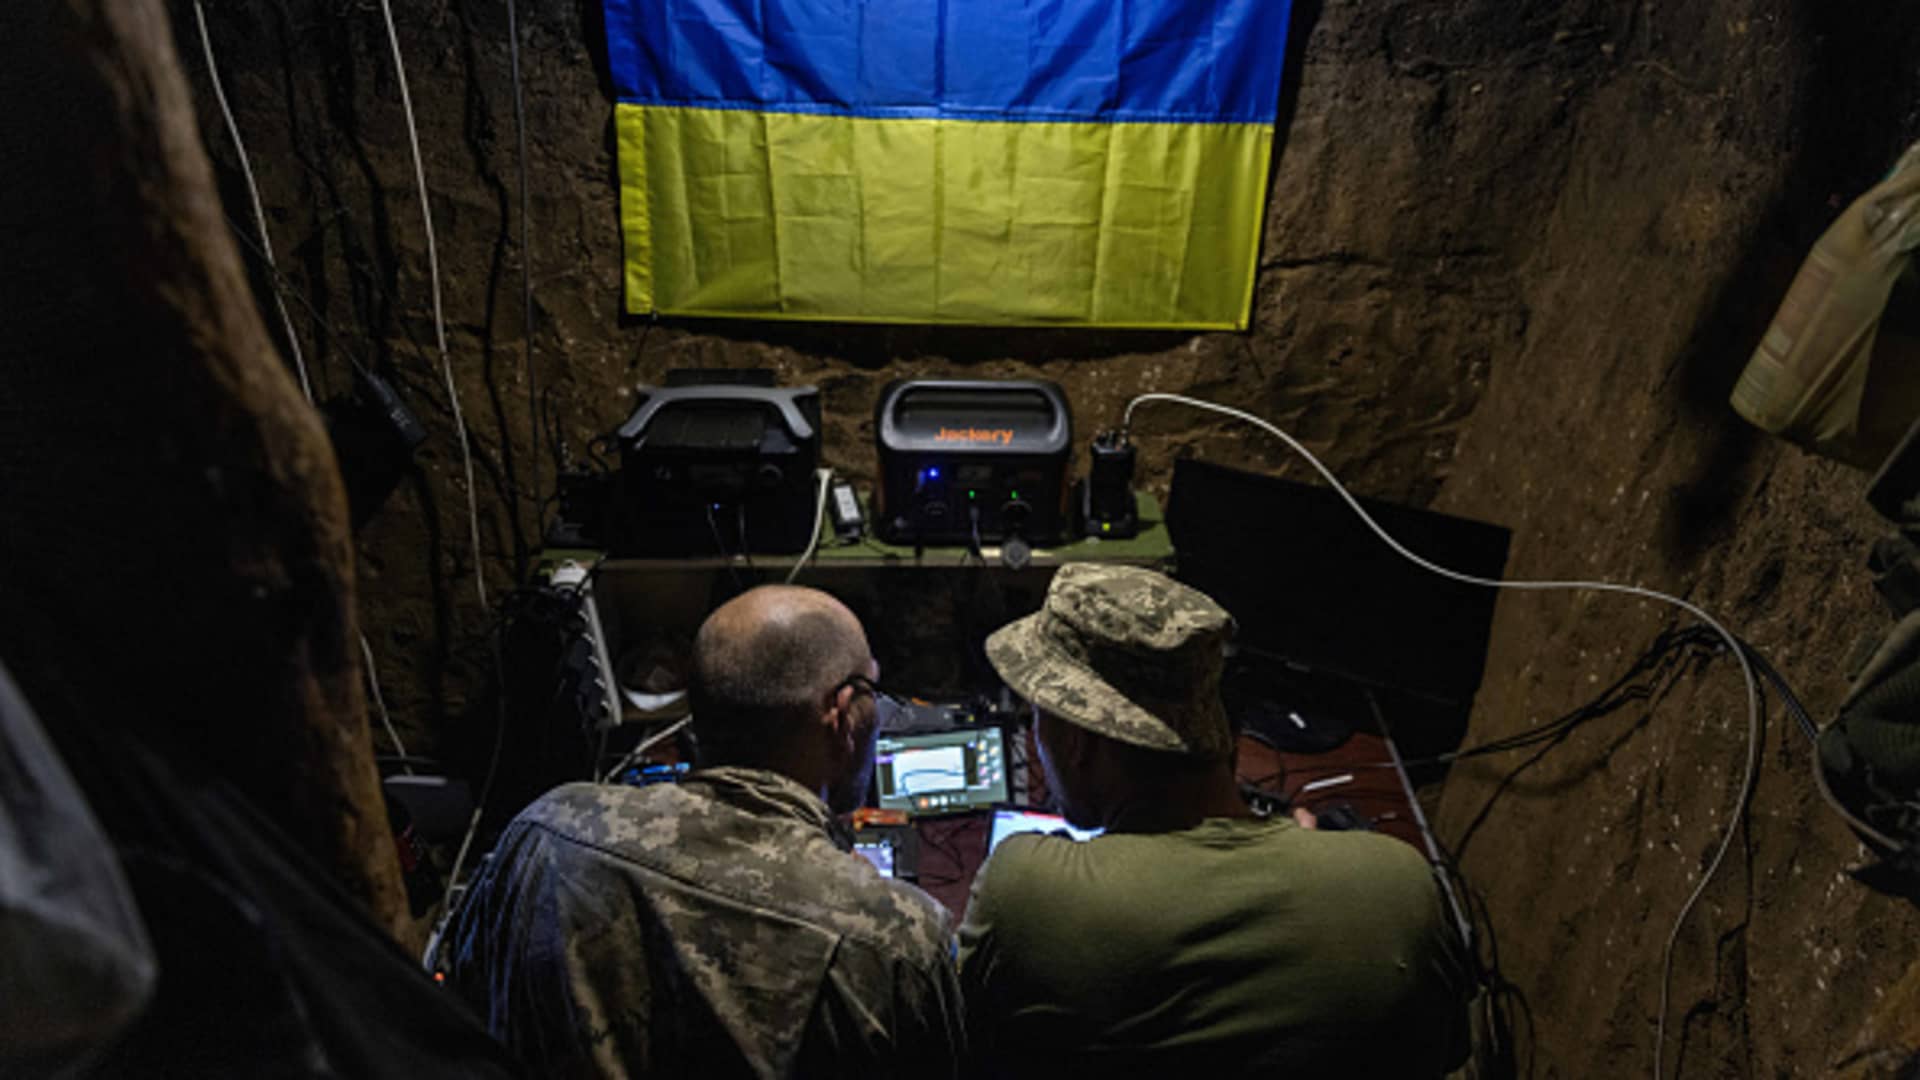 Is Ukraine’s counteroffensive failing? Defense experts say the risks facing Kyiv are growing